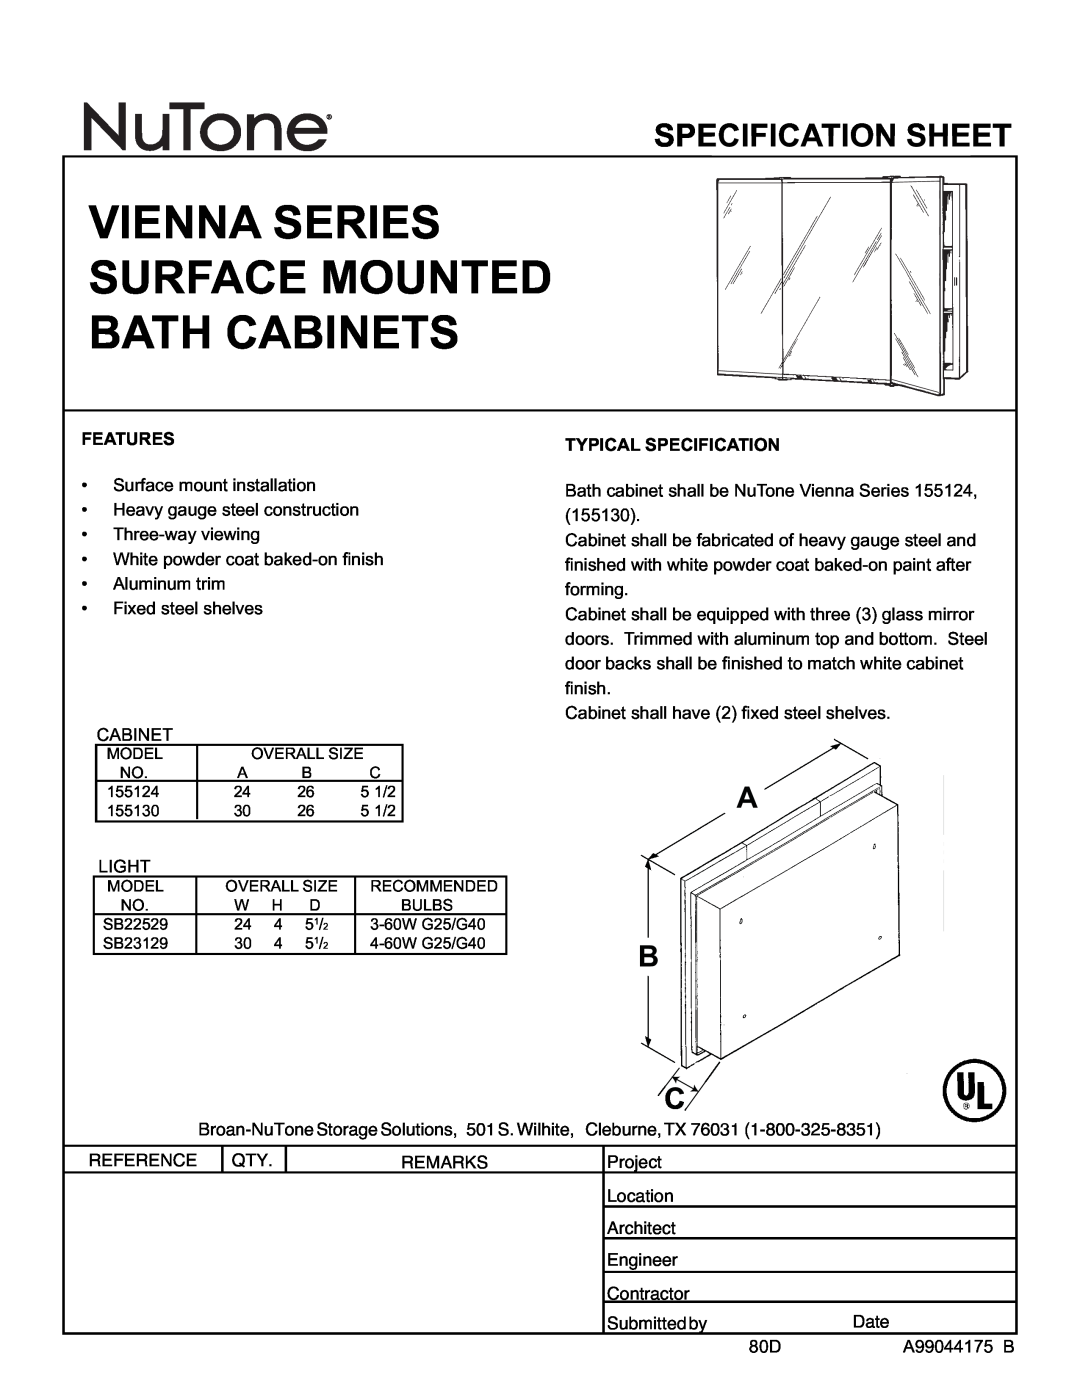 NuTone specifications Vienna Series Surface Mounted Bath Cabinets, Specification Sheet, Features, Typical Specification 